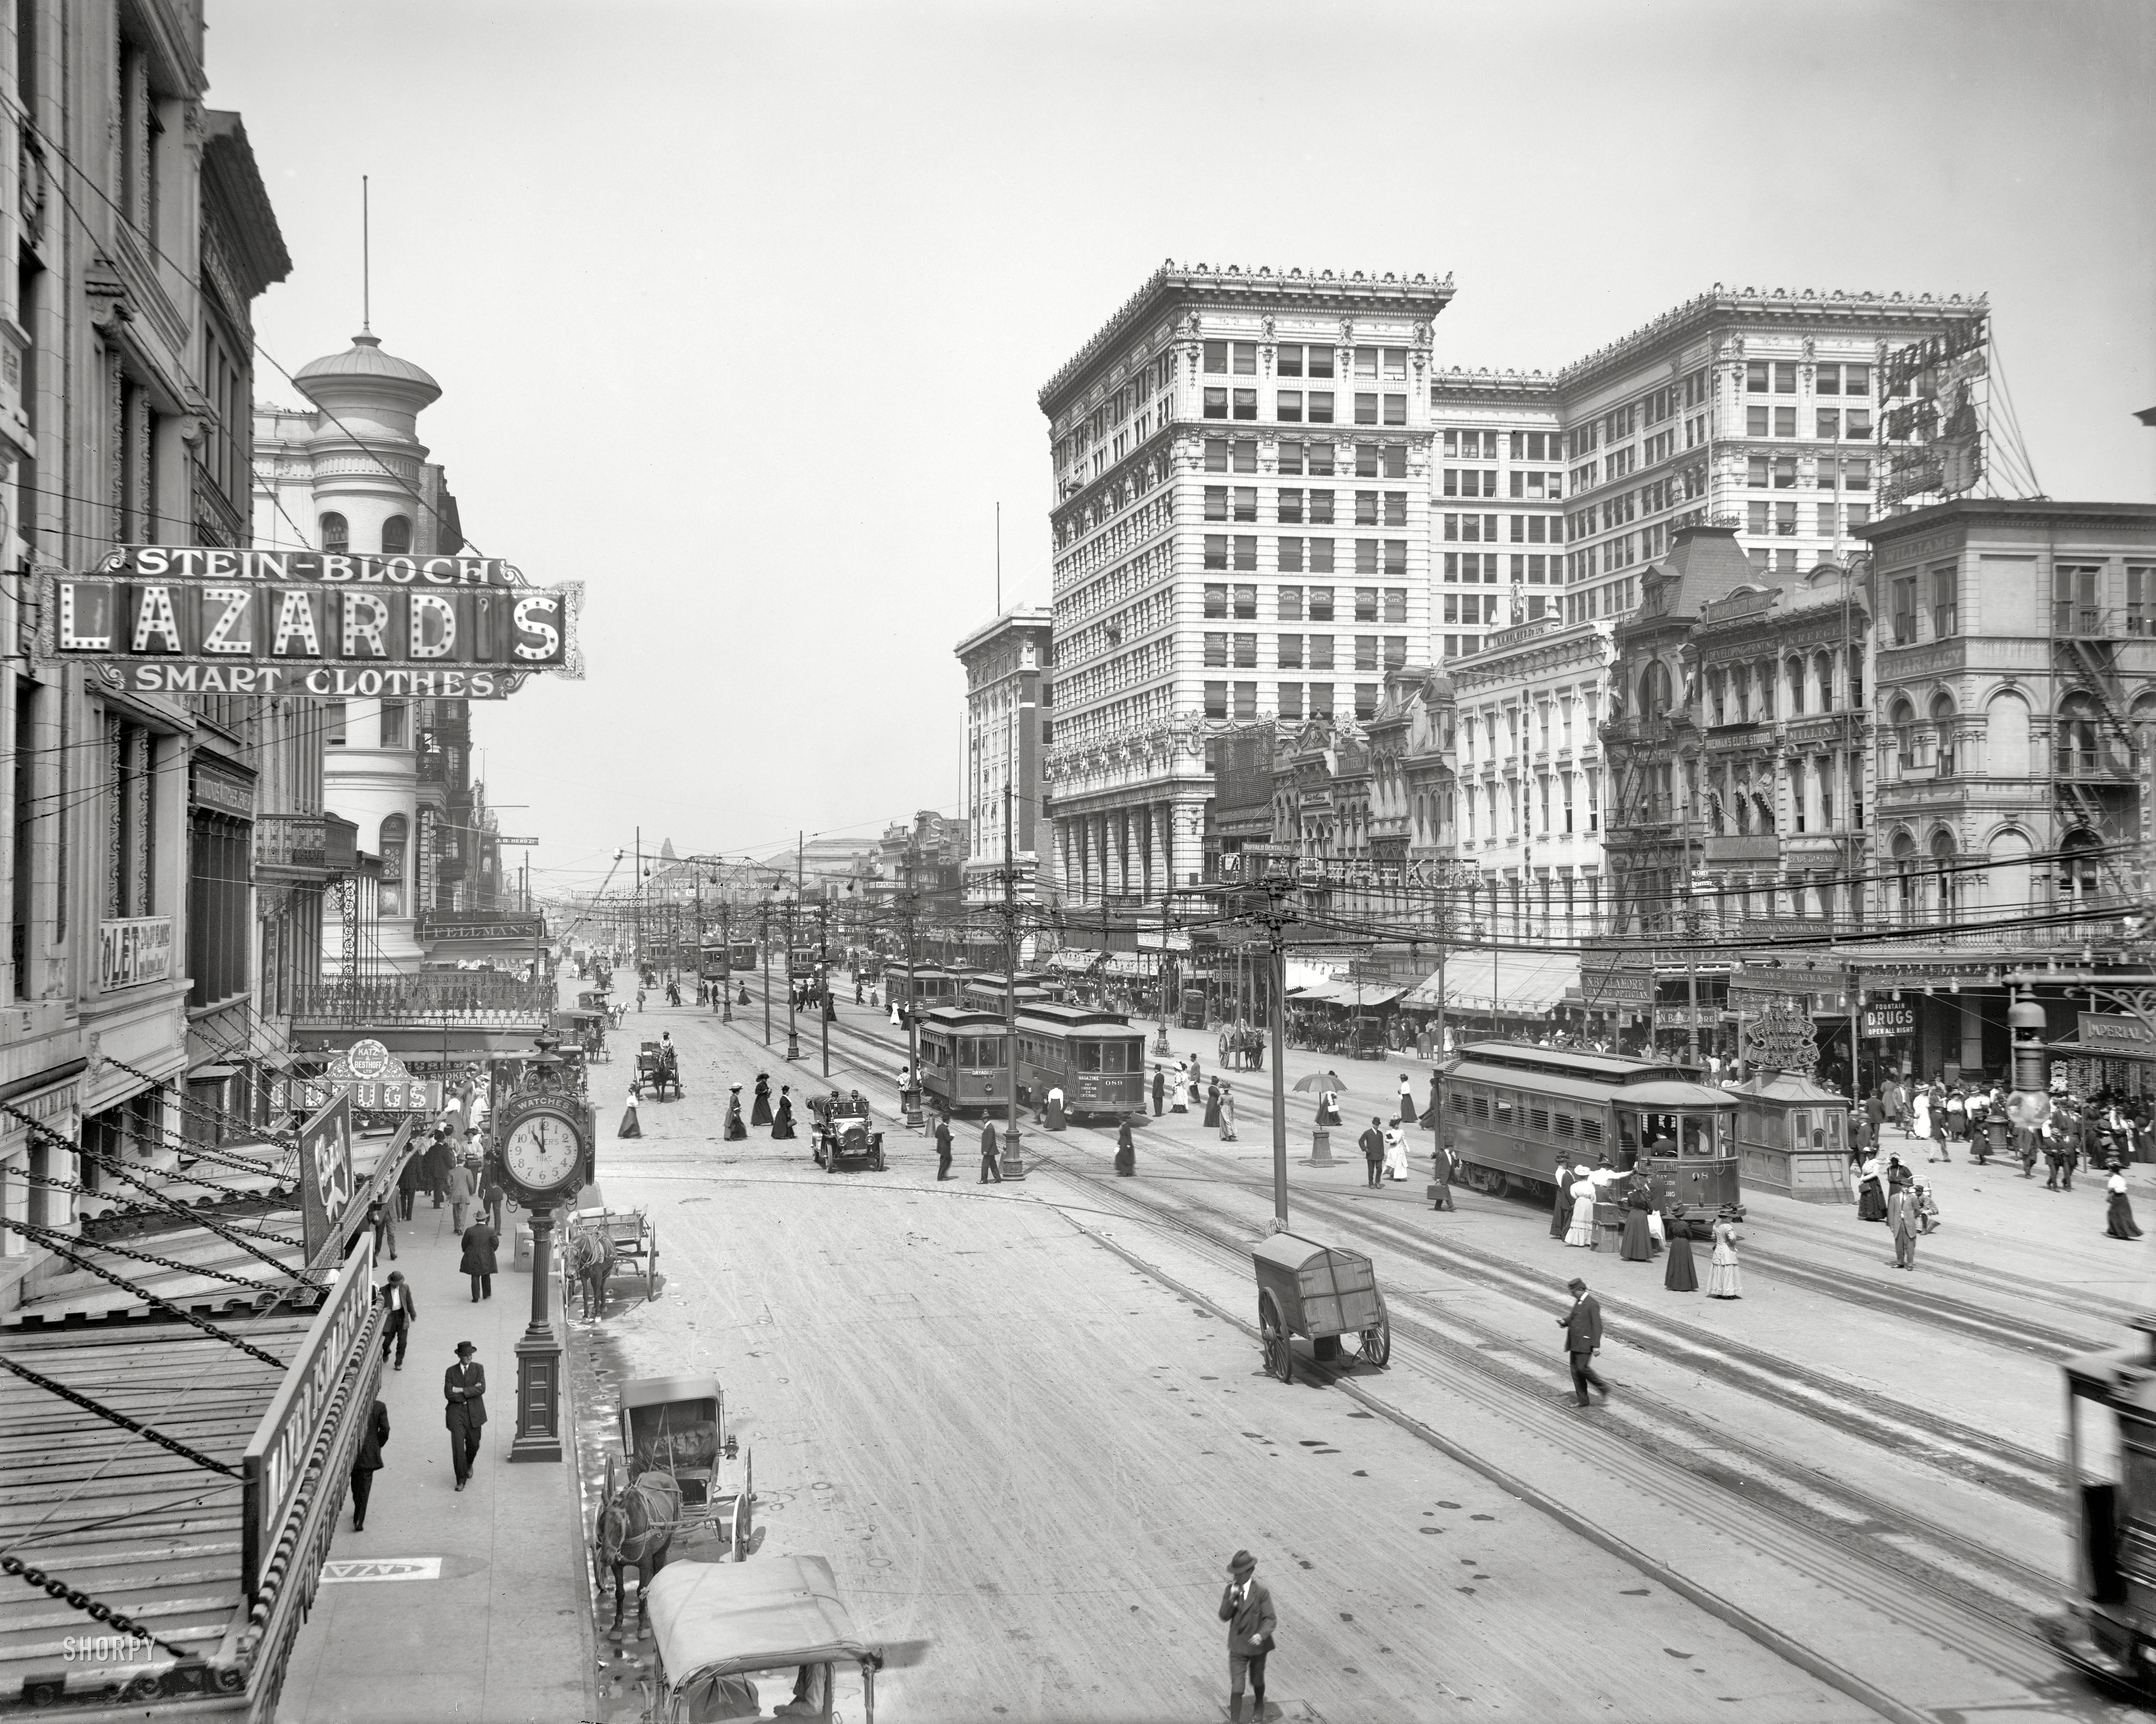 Canal Street in New Orleans circa 1910. Large building is the Maison Blanche department store. 8x10 glass negative, Detroit Publishing Co. View full size.